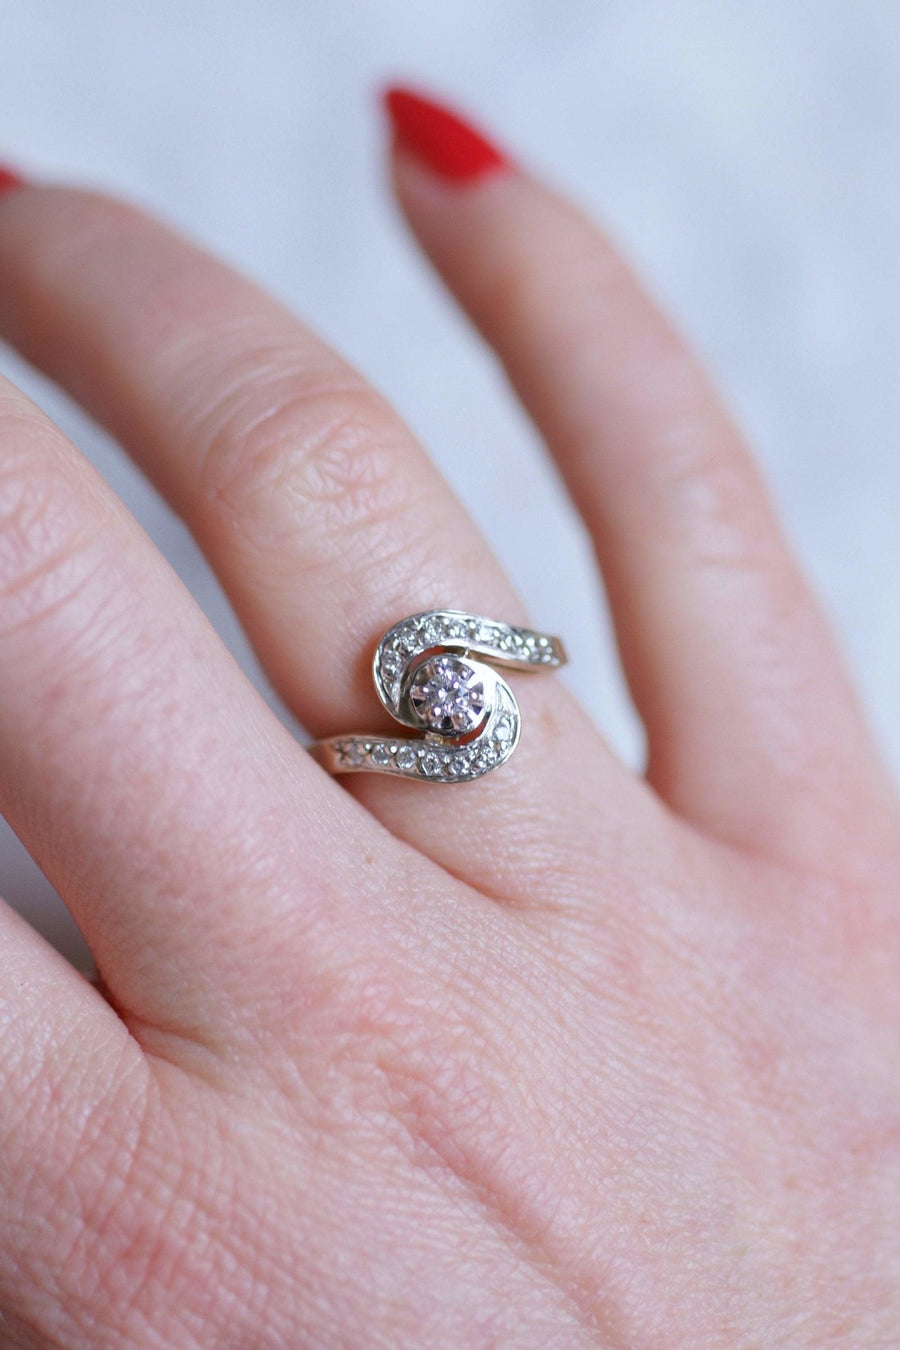 Belle Epoque style Tourbillon engagement ring in gold and diamonds - Galerie Pénélope